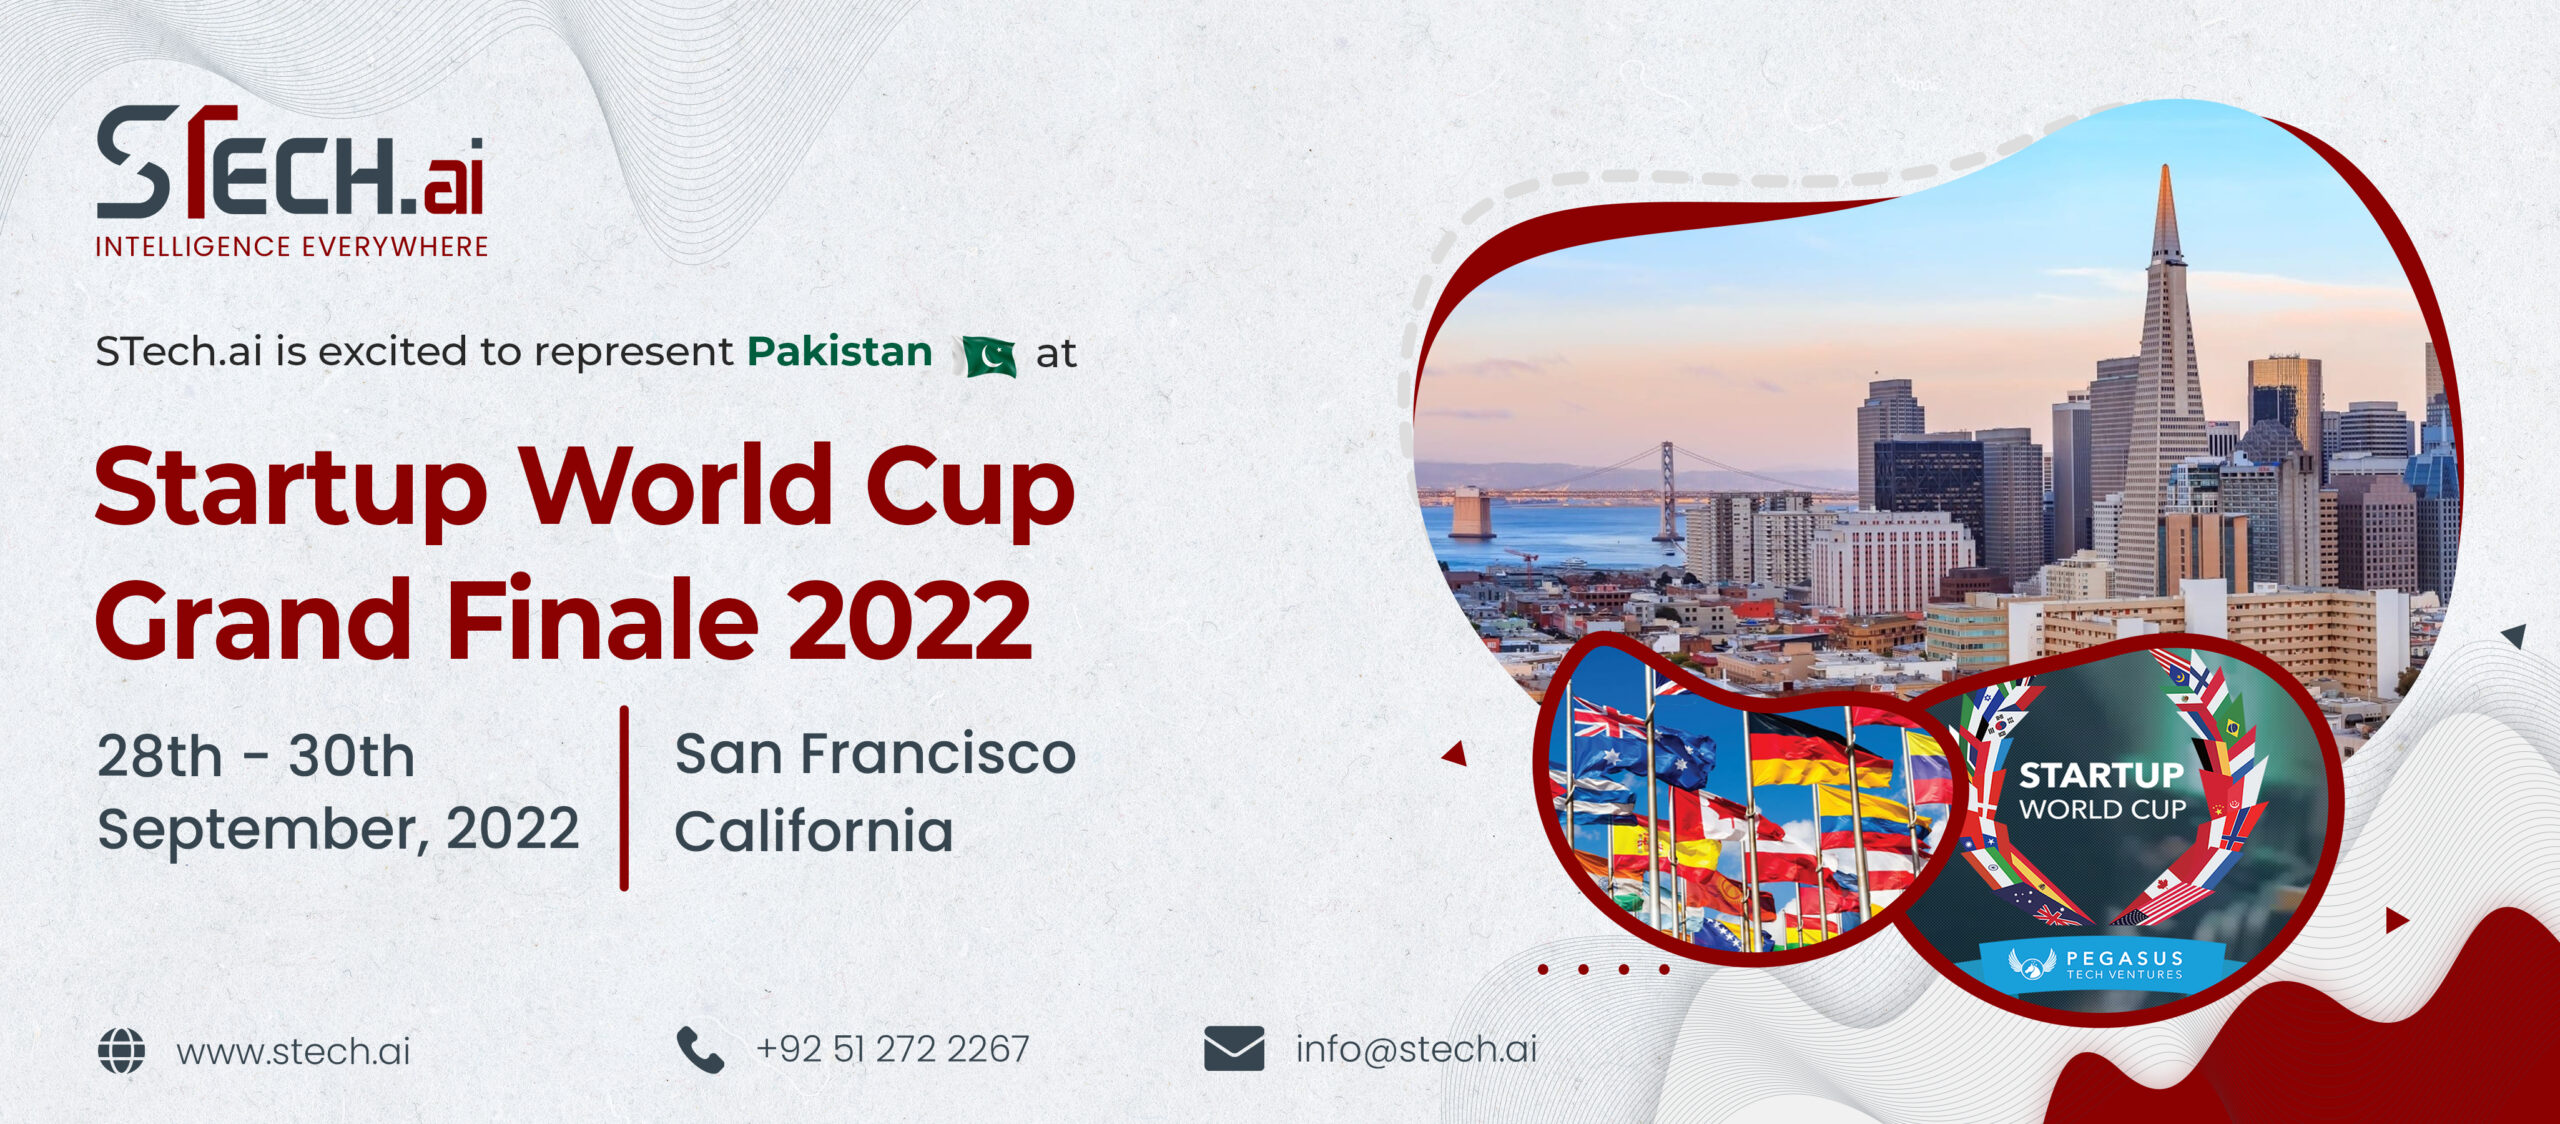 STech.ai is competing in Startup World Cup 2022